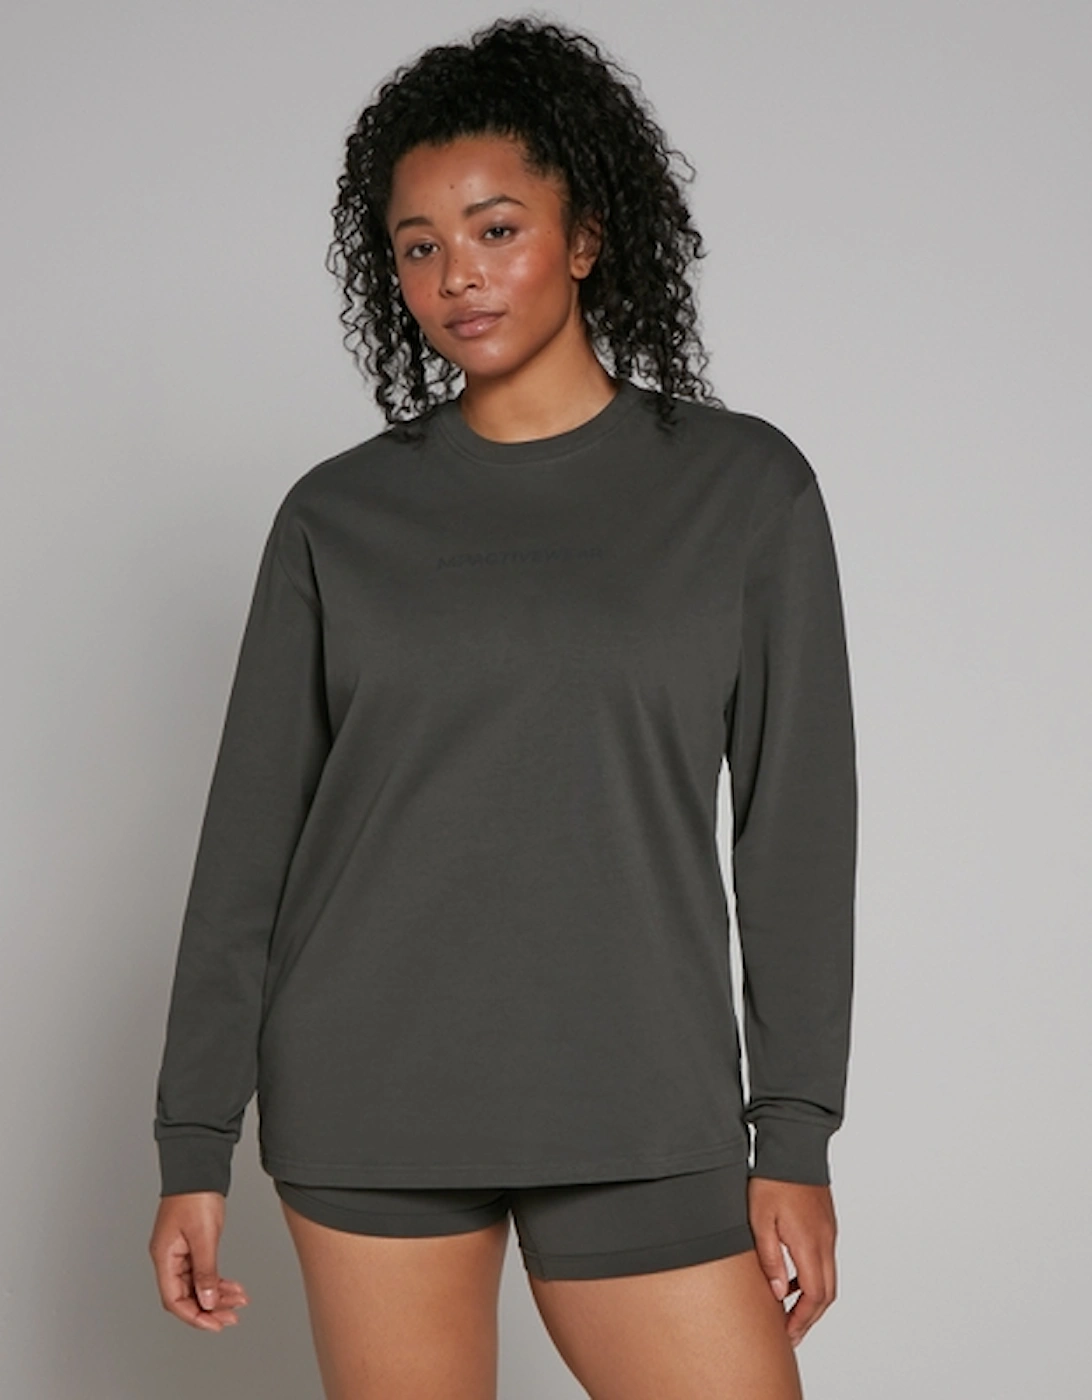 Women's Rest Day Oversized Long Sleeve T-Shirt - Taupe Green